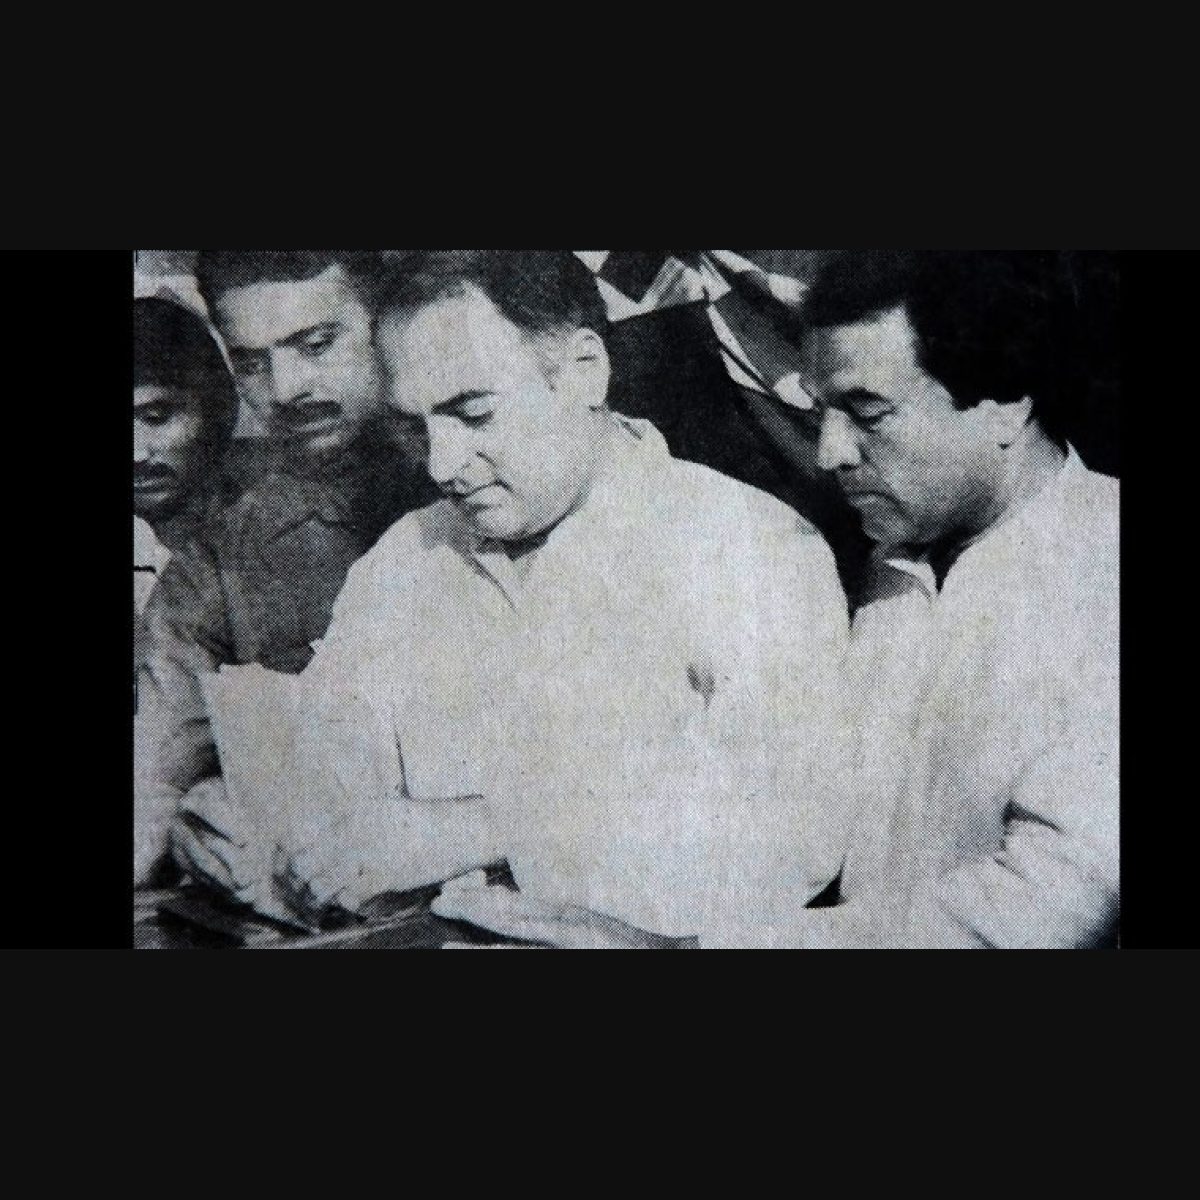 Rajiv knew a divided Sri Lanka would create problems for India